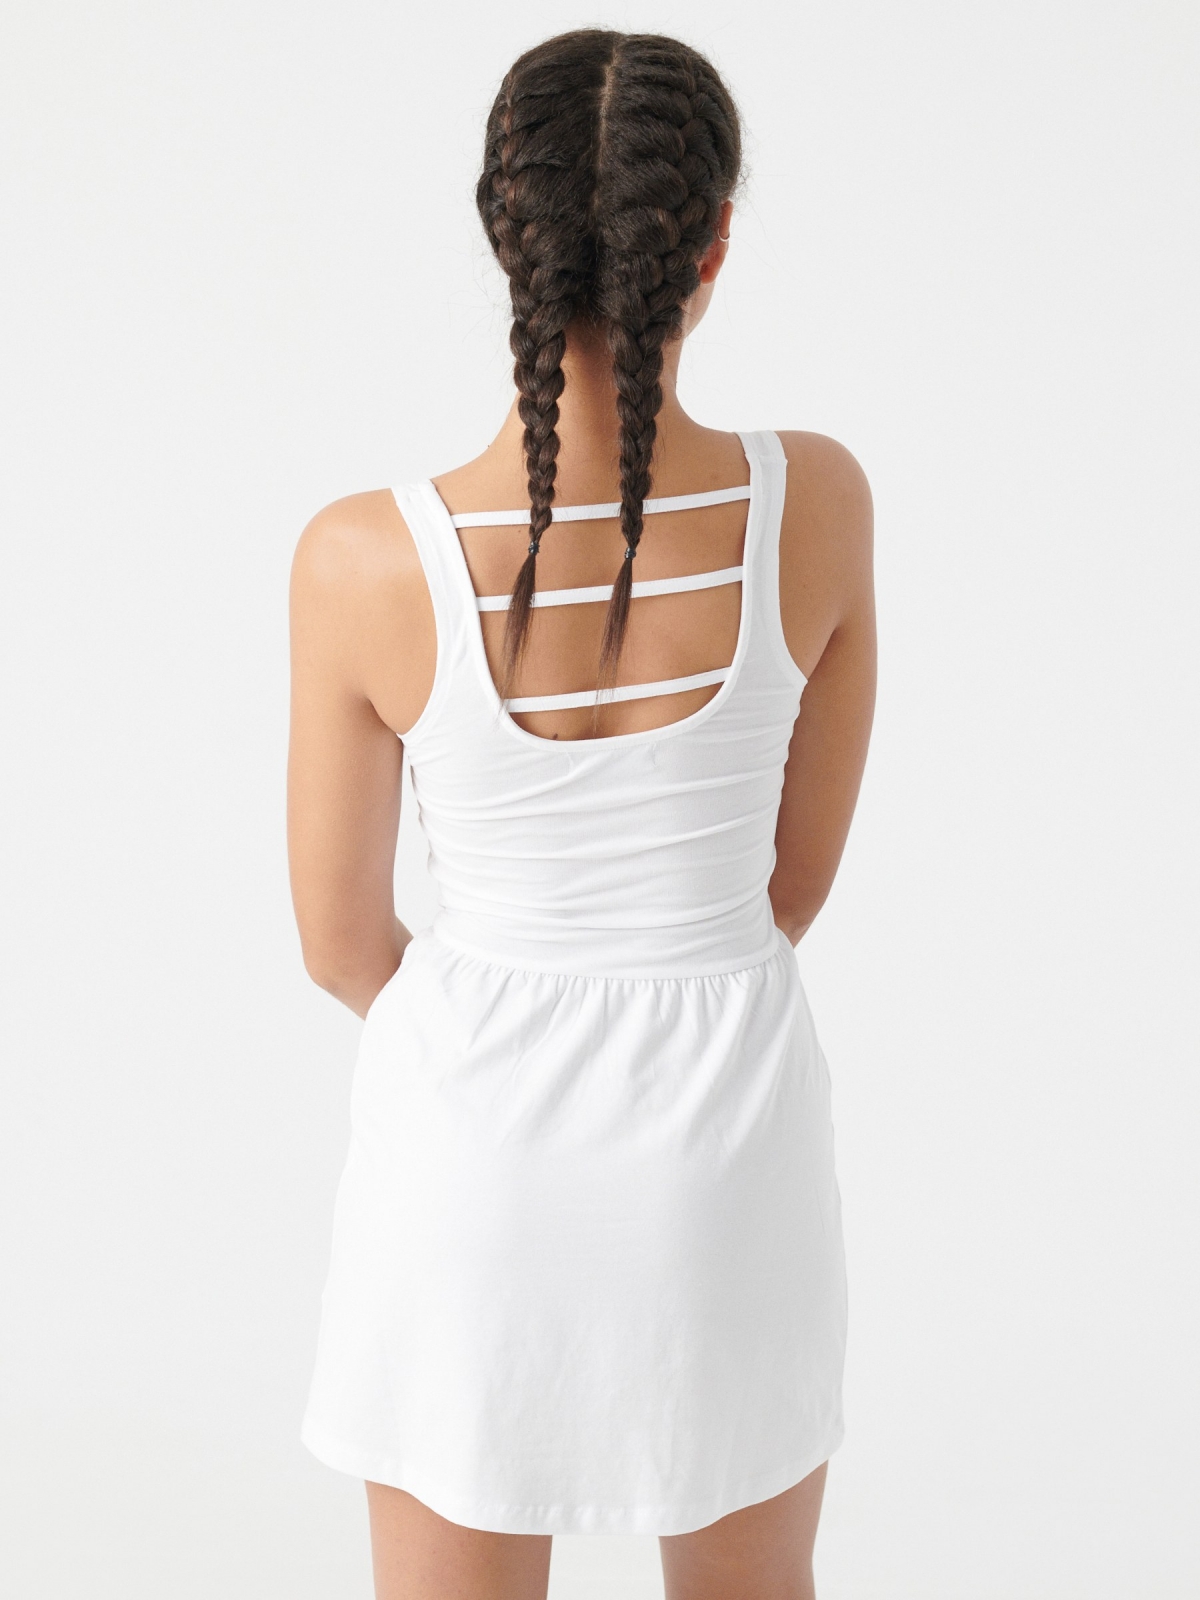 Strips back dress white middle back view